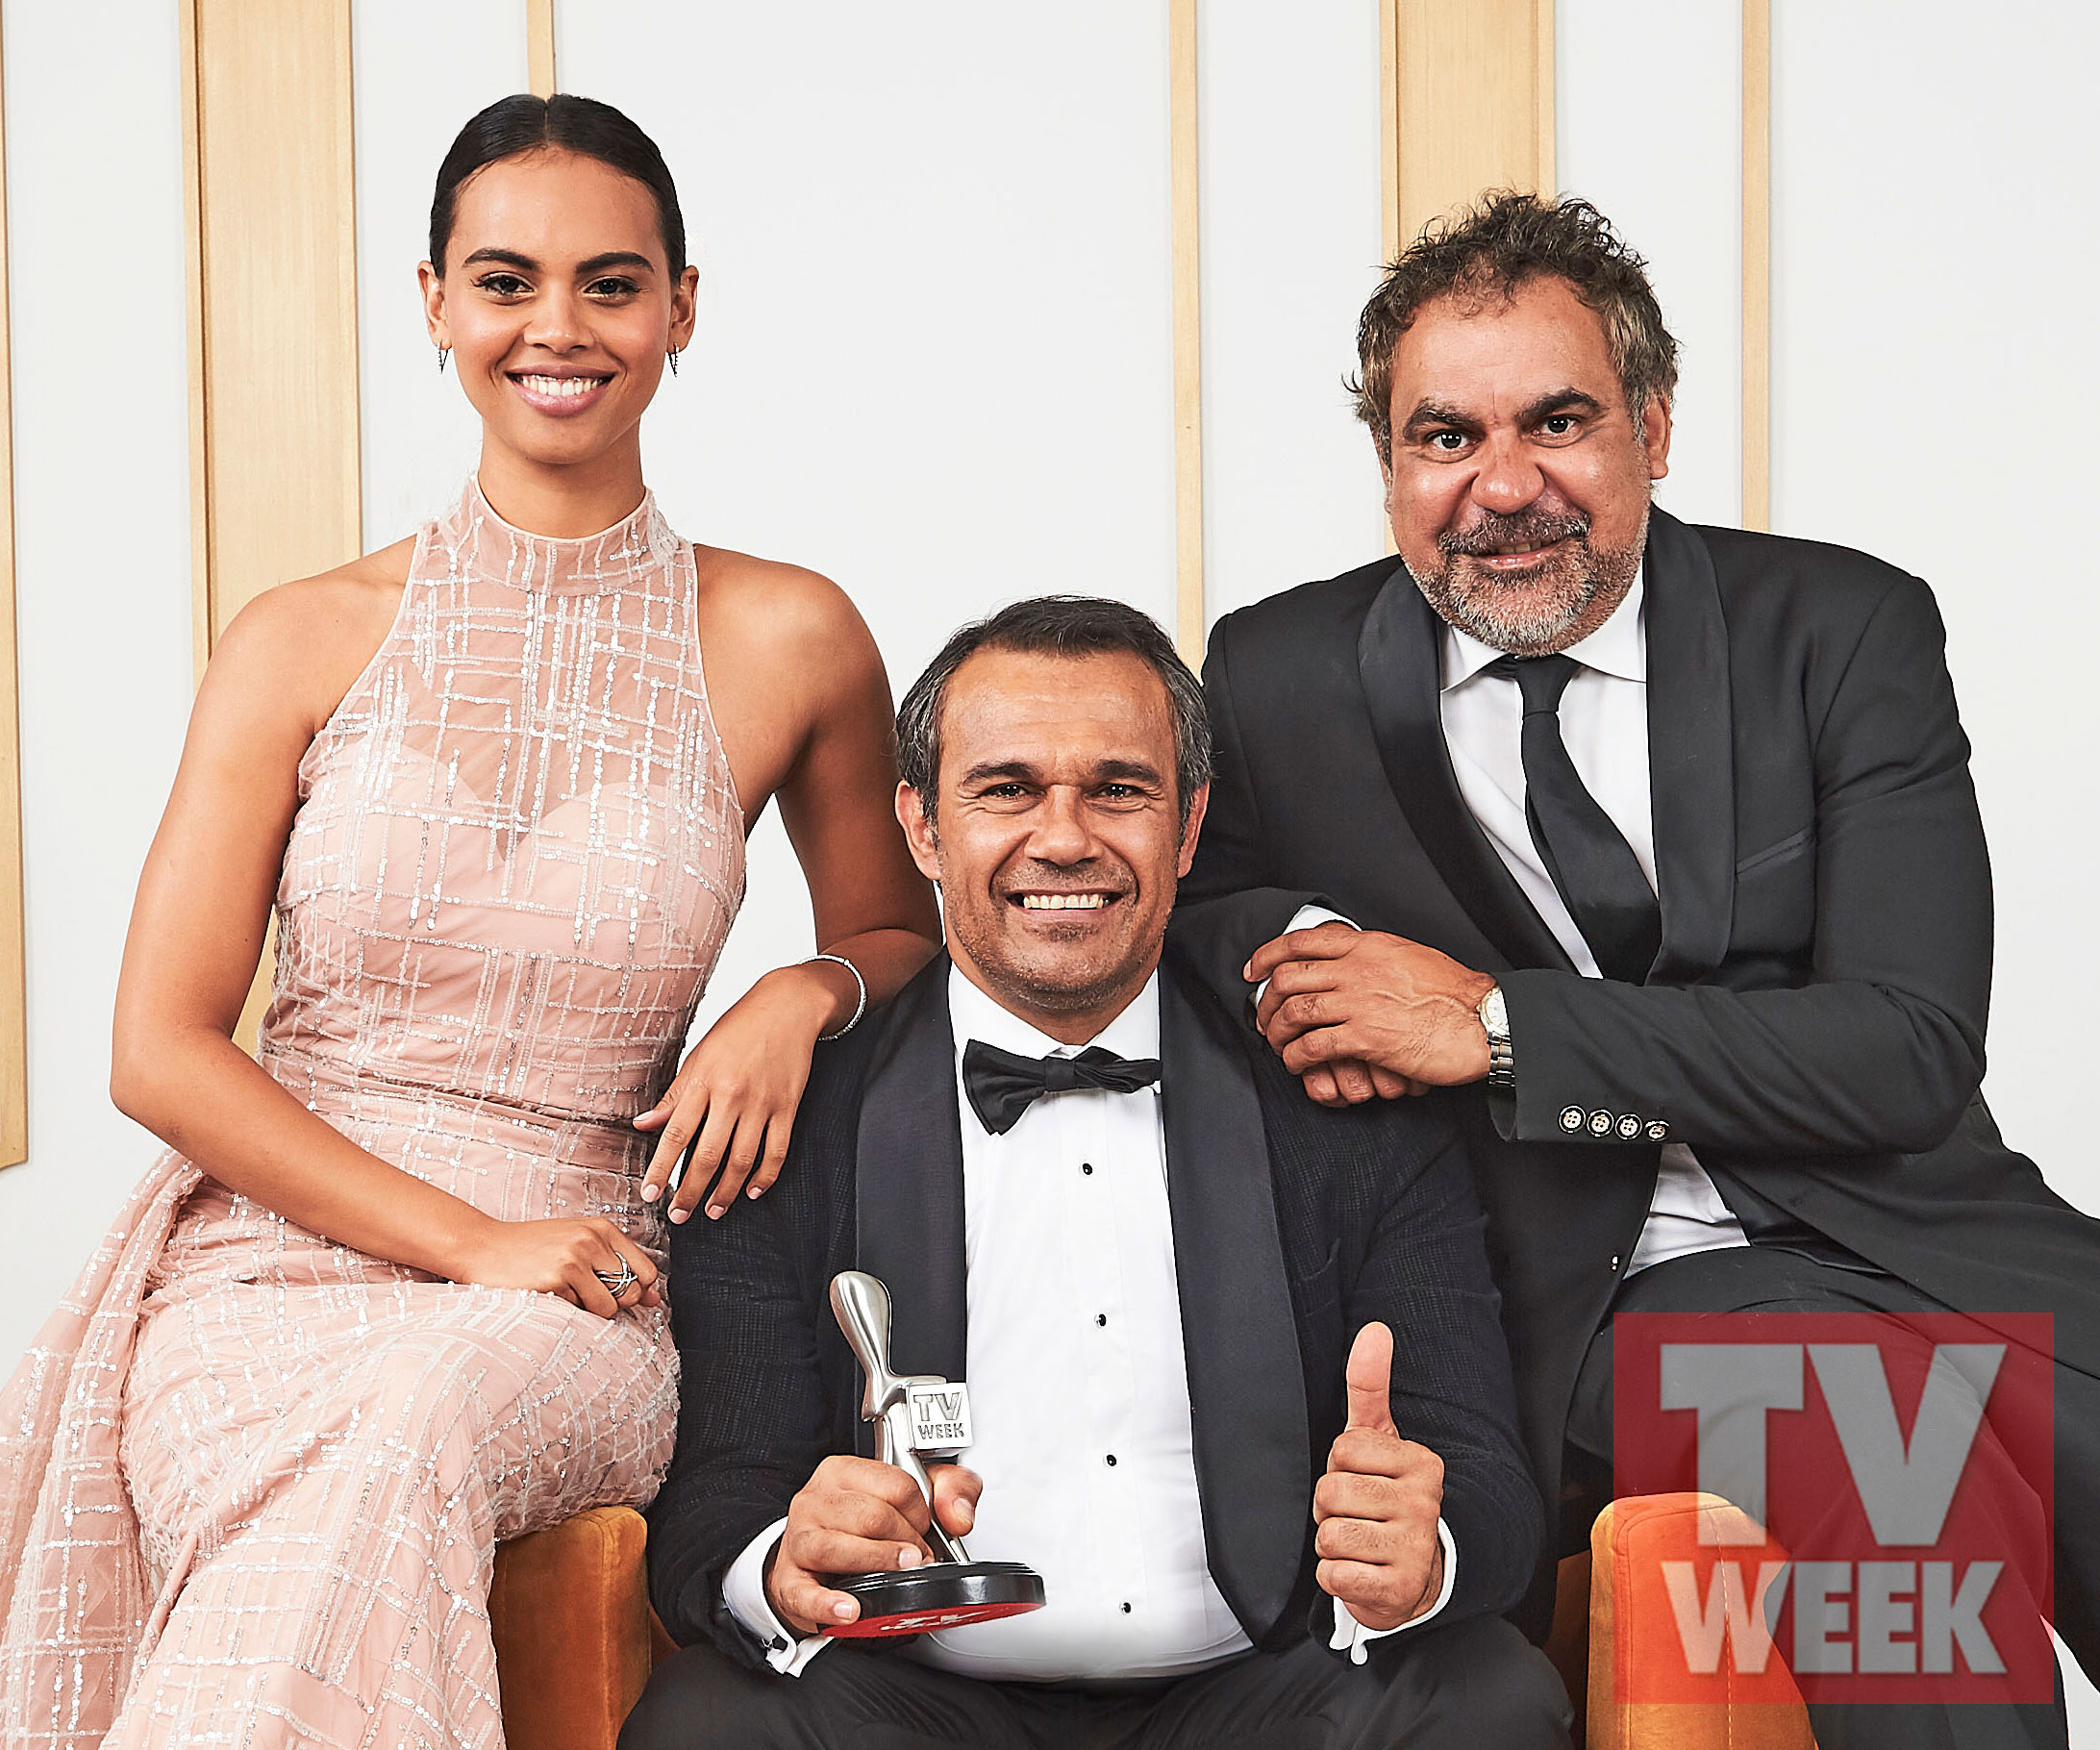 The cast of Mystery Road celebrates taking Indigenous stories to the mainstream